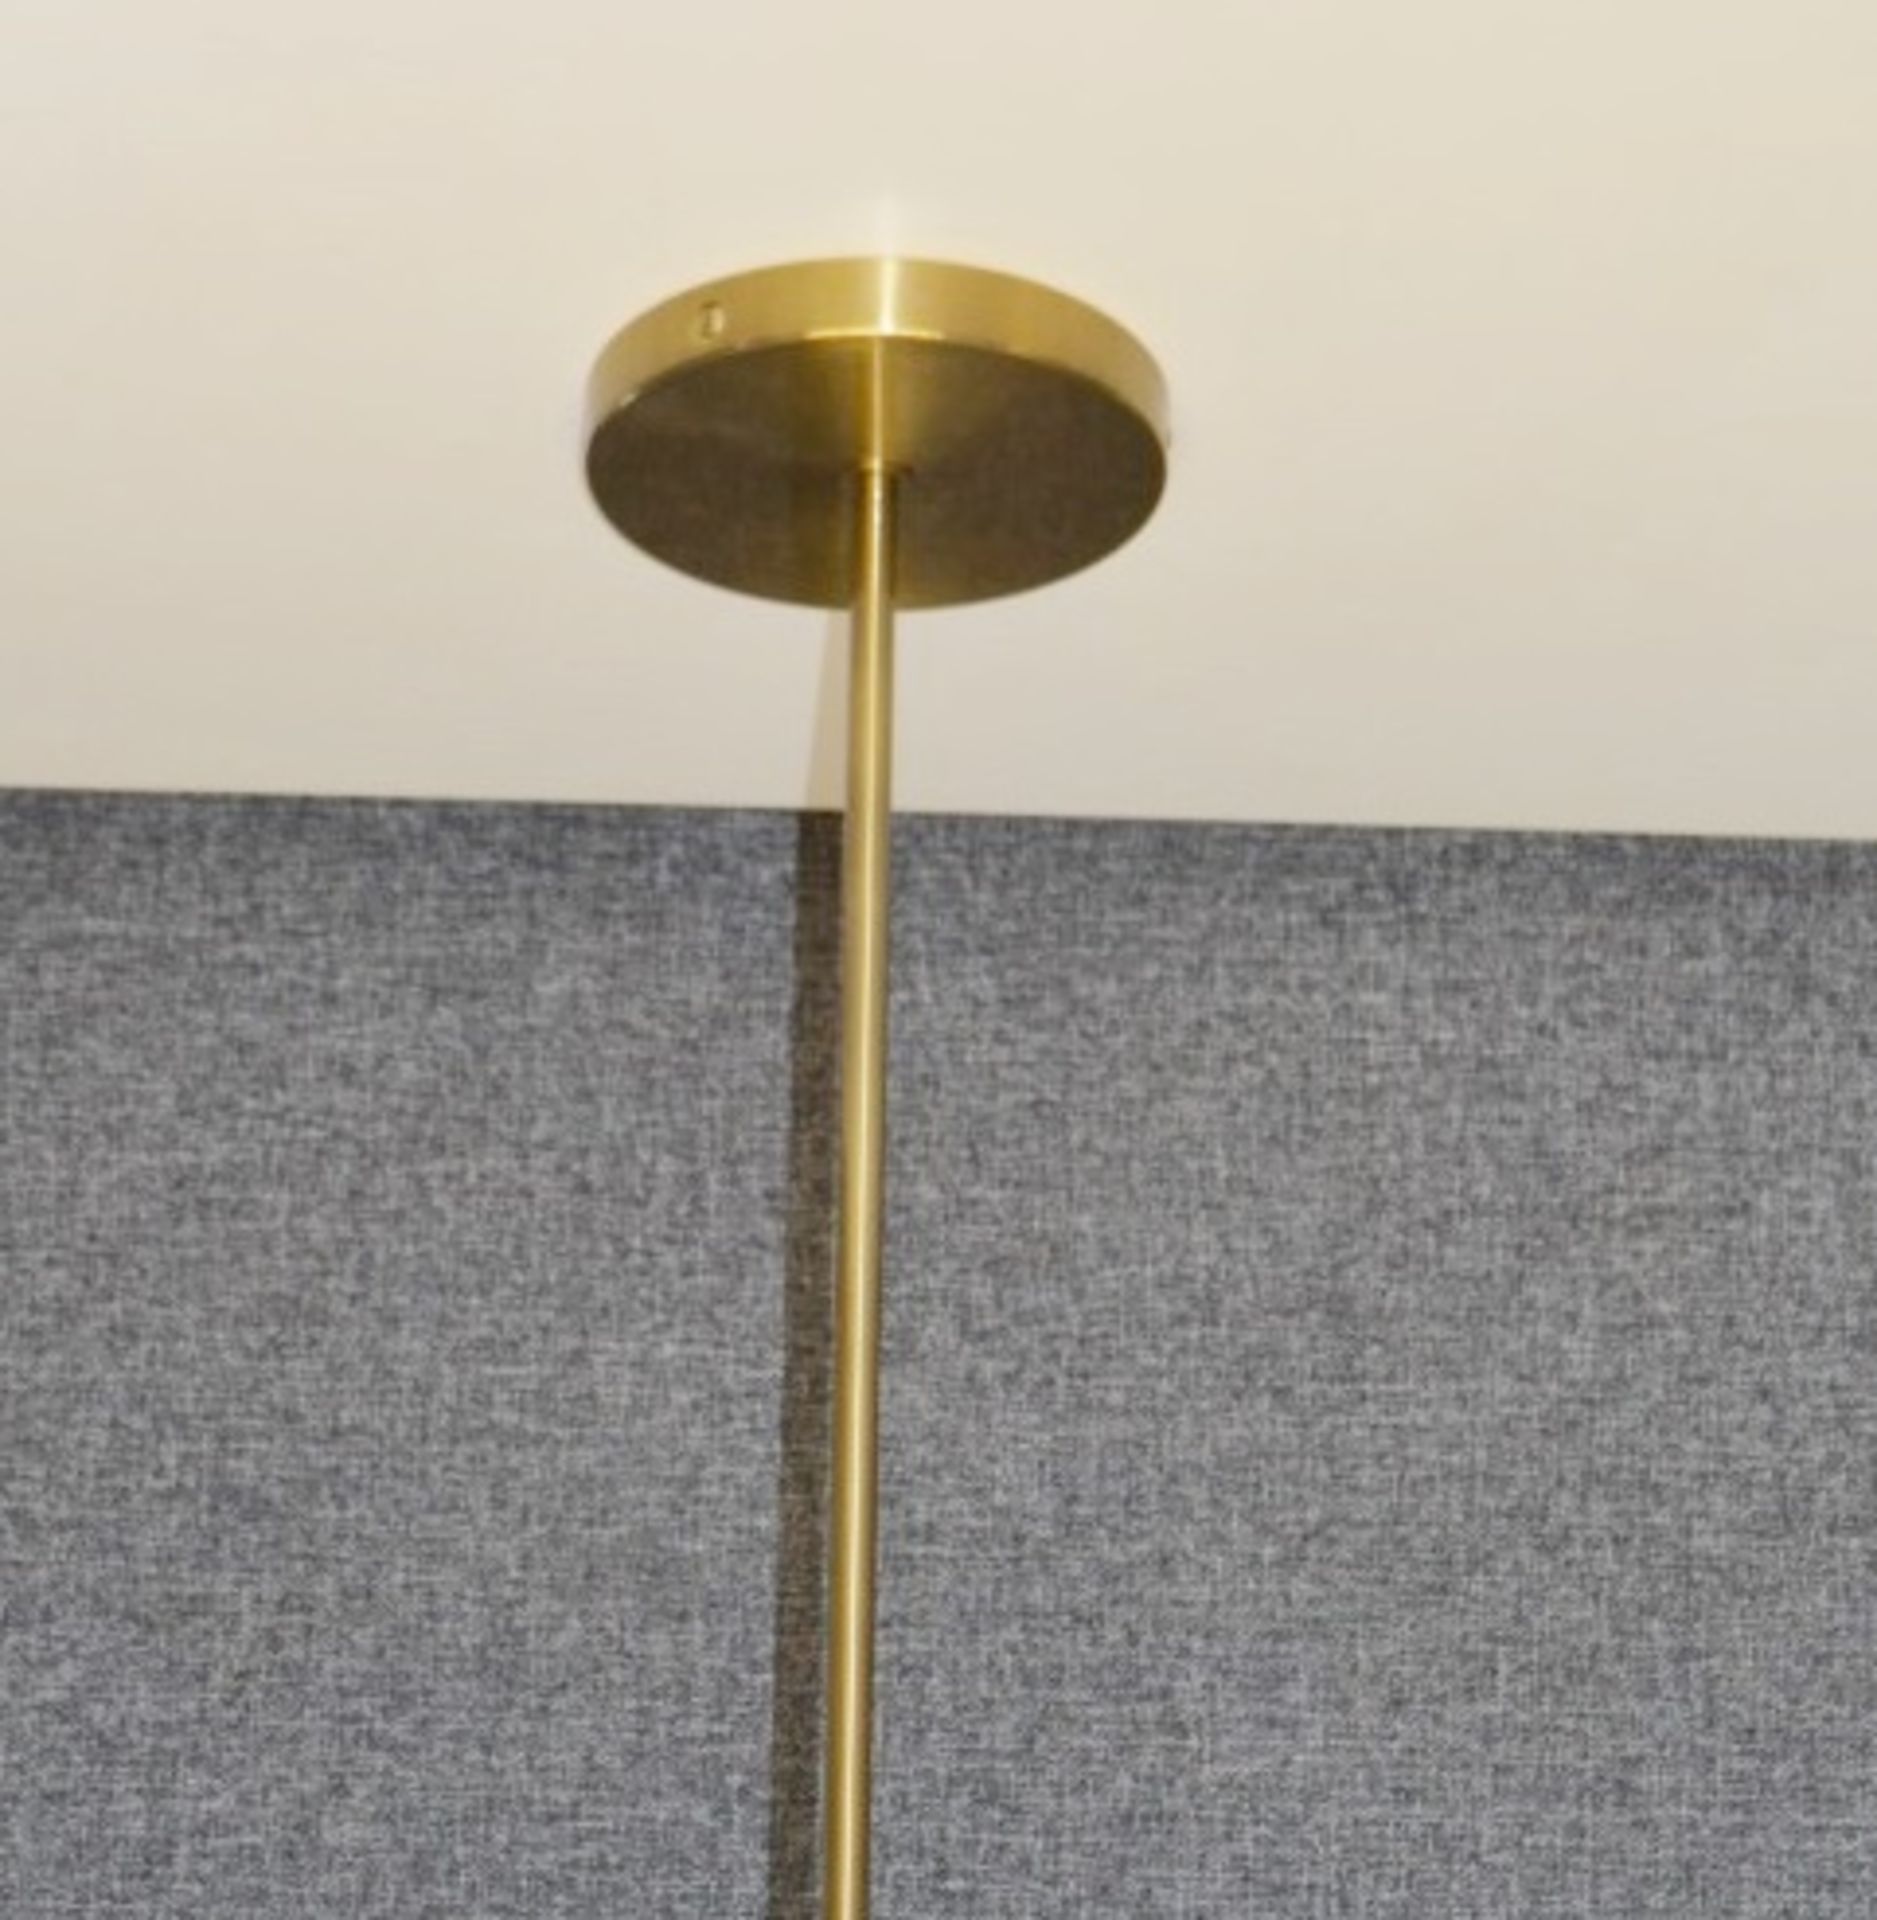 1 x CHELSOM Ceiling Light In A Polished Brass Finish With An Opal Glass Shade - Unused Boxed Stock - - Image 5 of 7